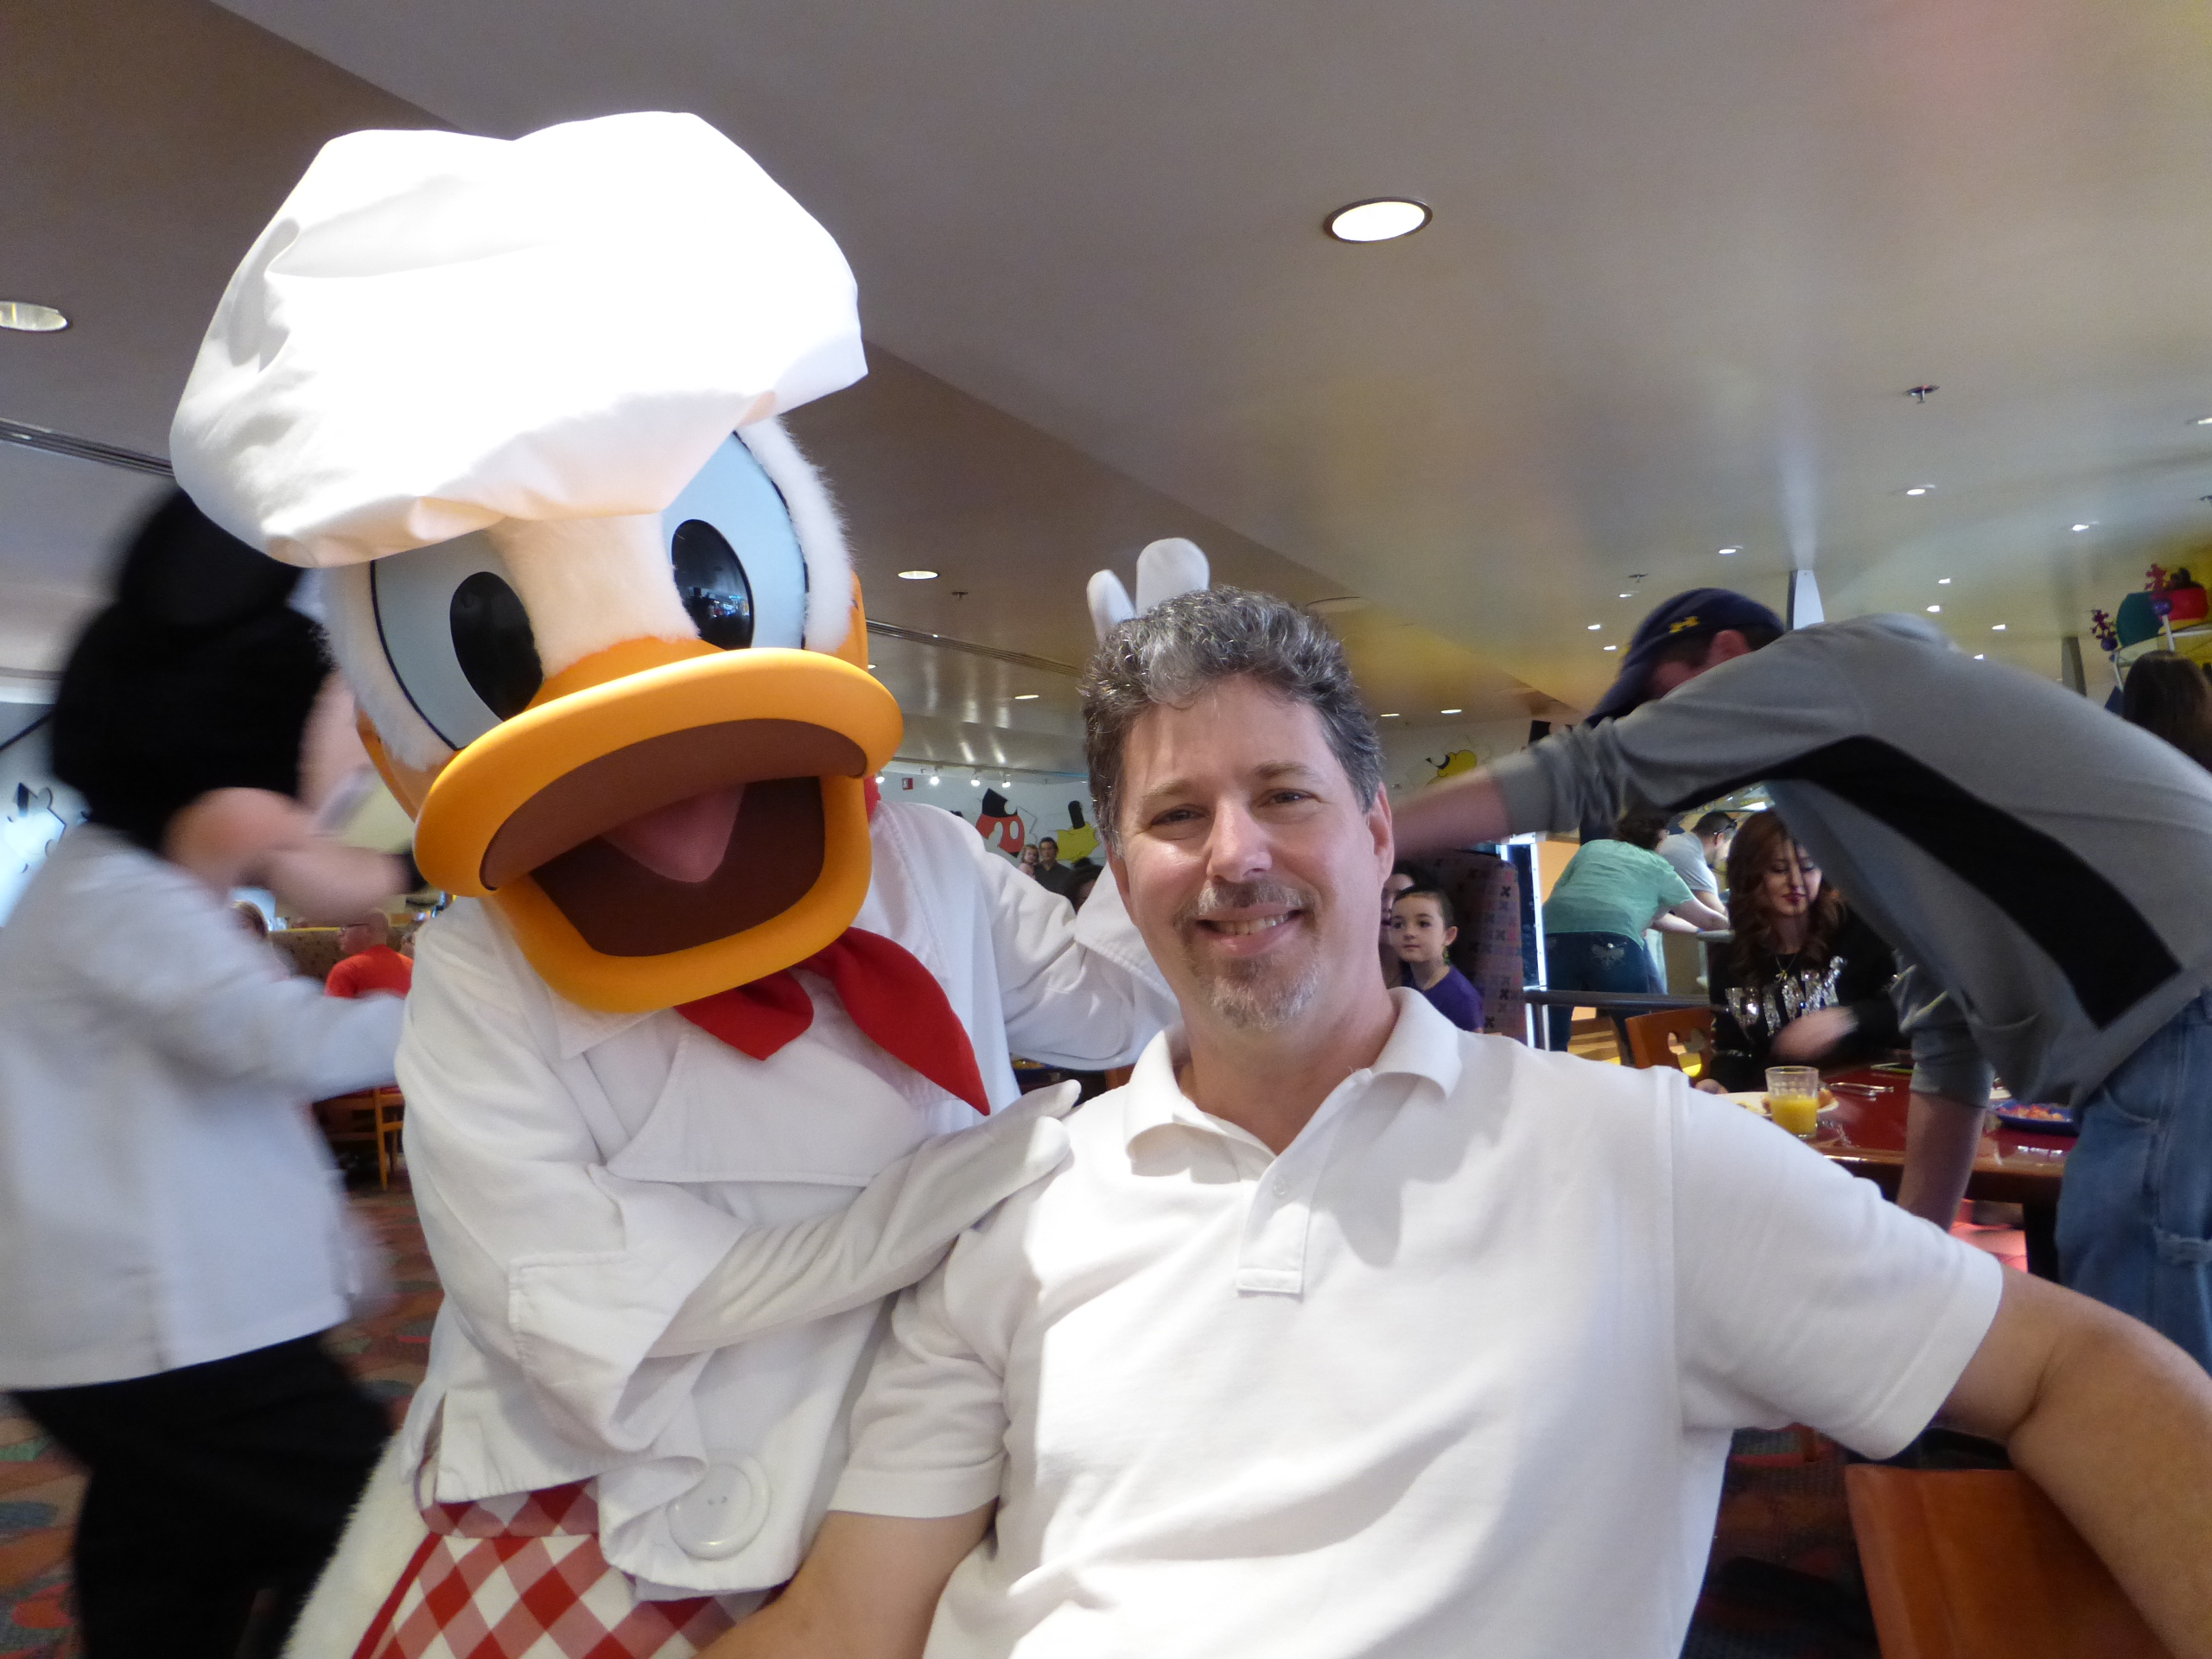 Very Good Advice Blog Hop #3: Food Allergies- Tips for Dining at Walt Disney World